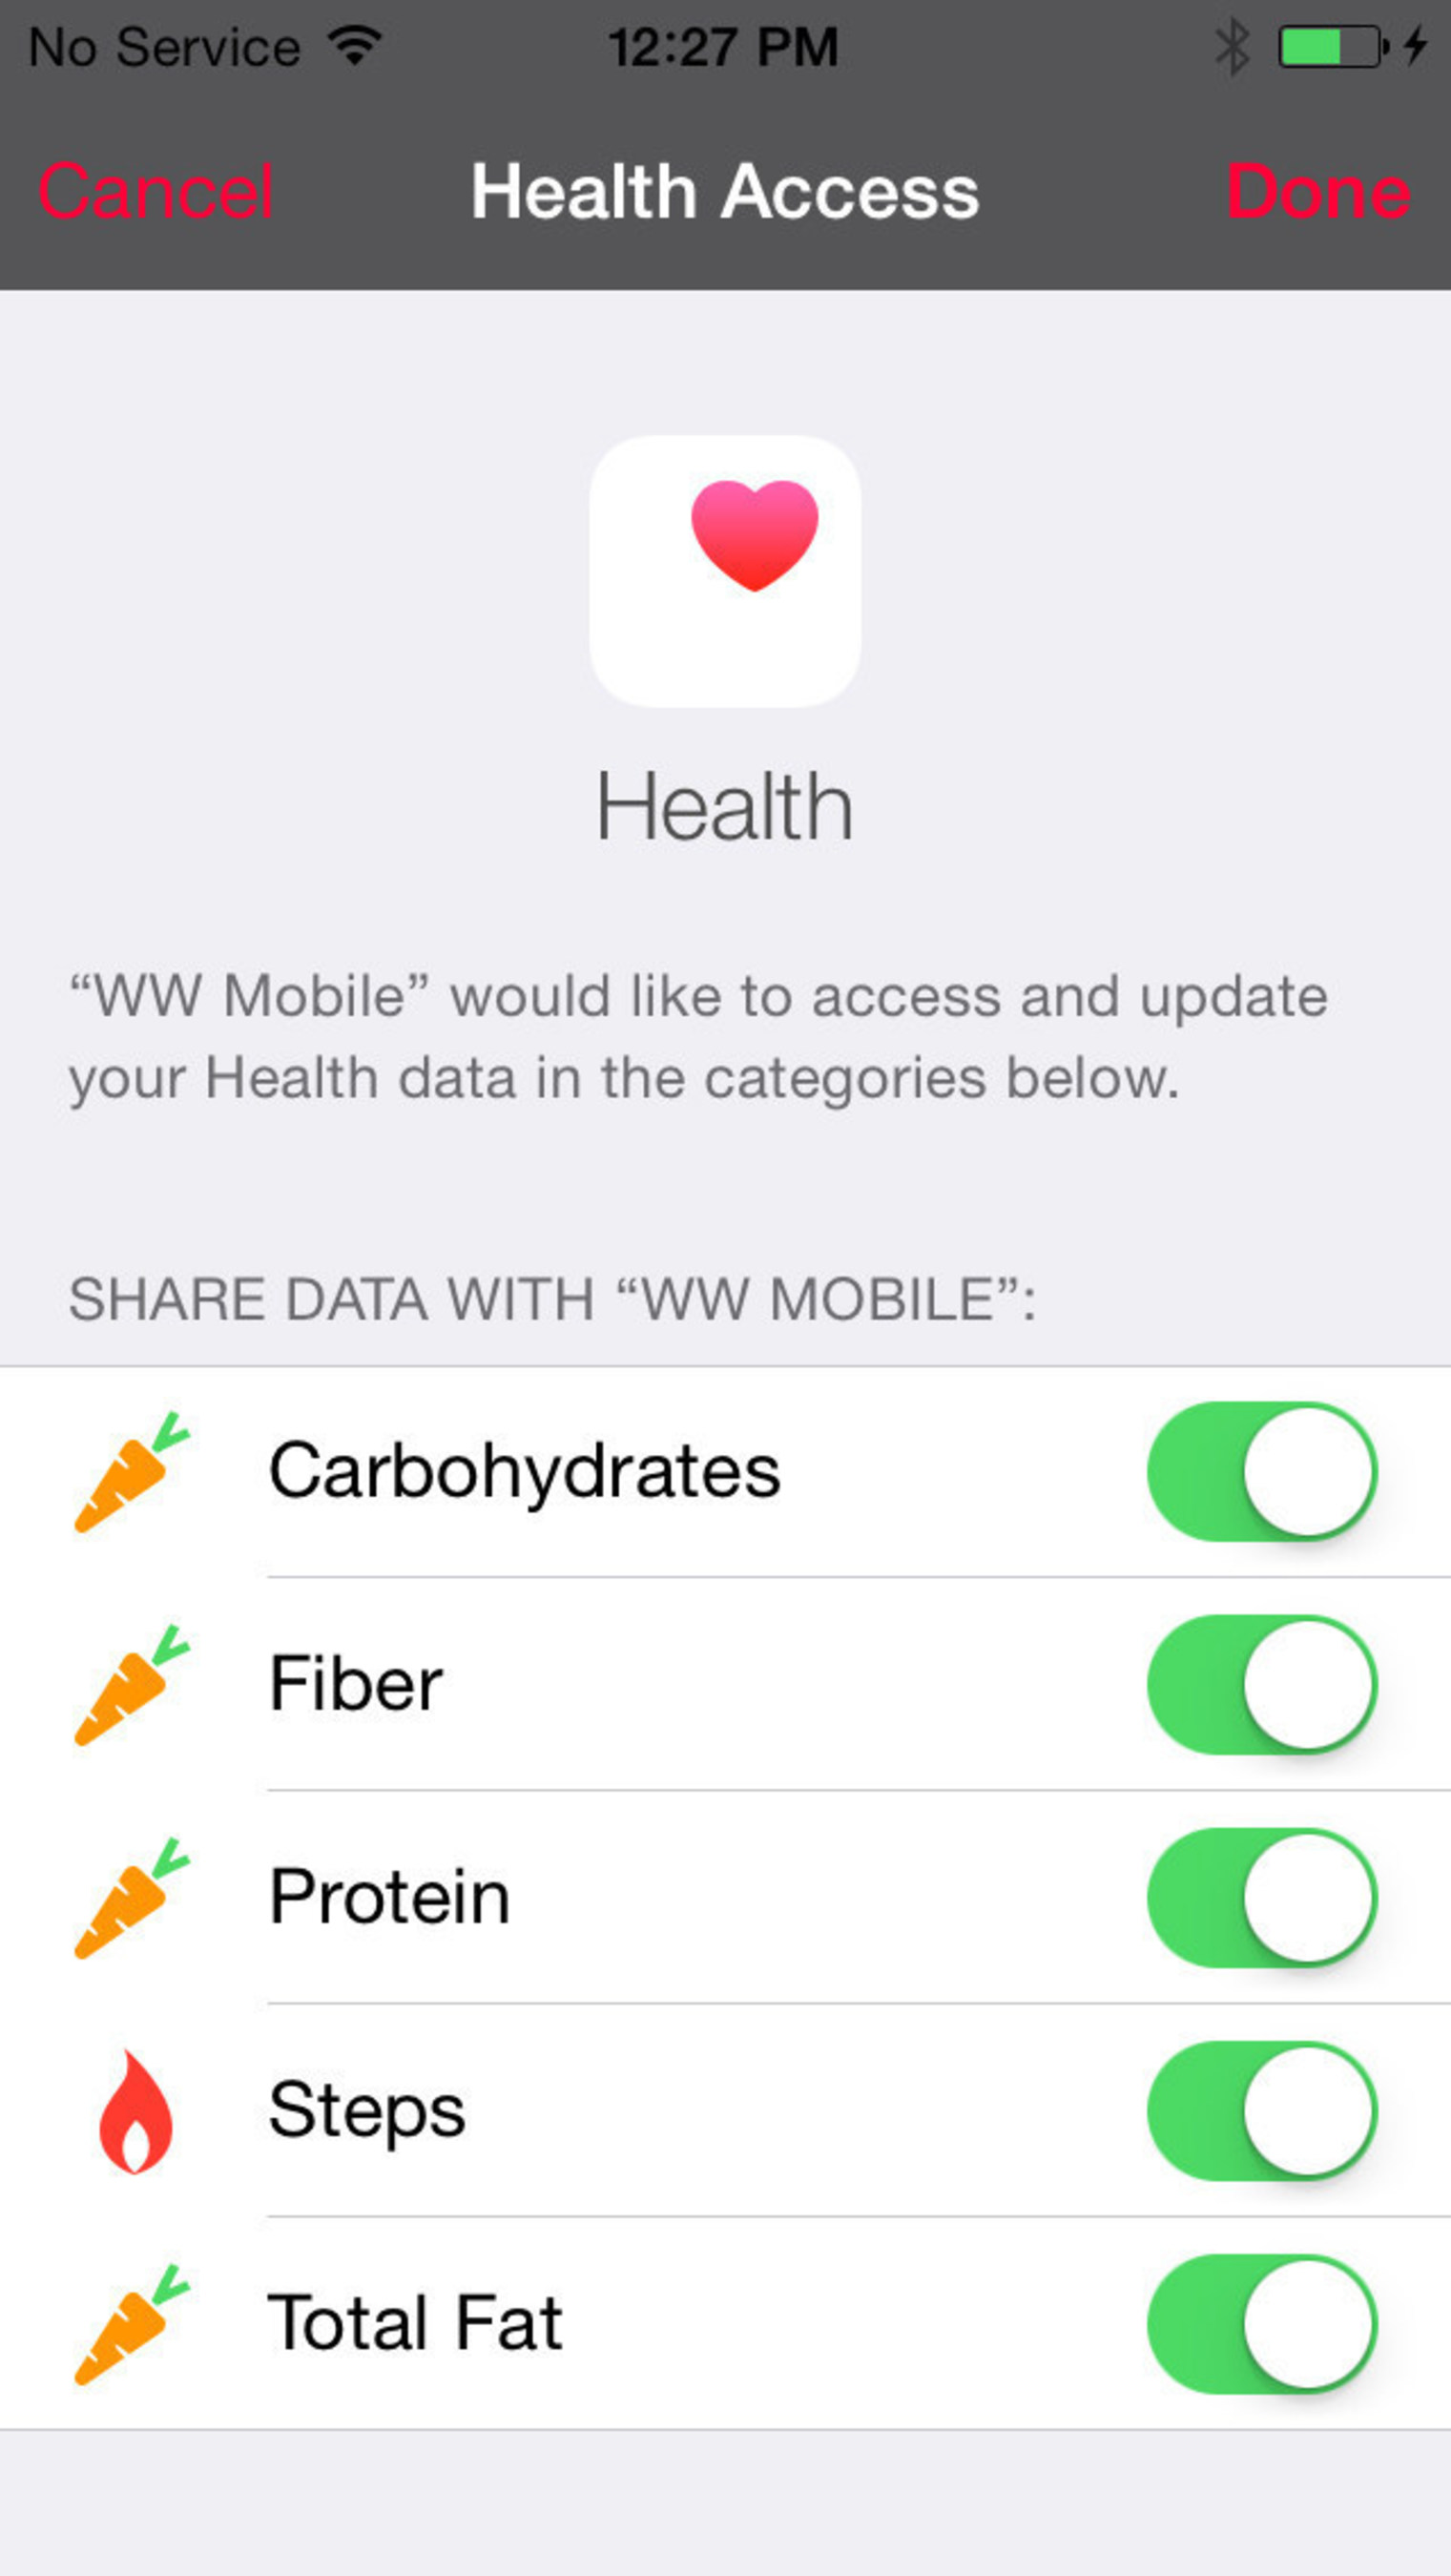 Weight Watchers Leverages iOS 8 And HealthKit With New Features (PRNewsFoto/Weight Watchers International)